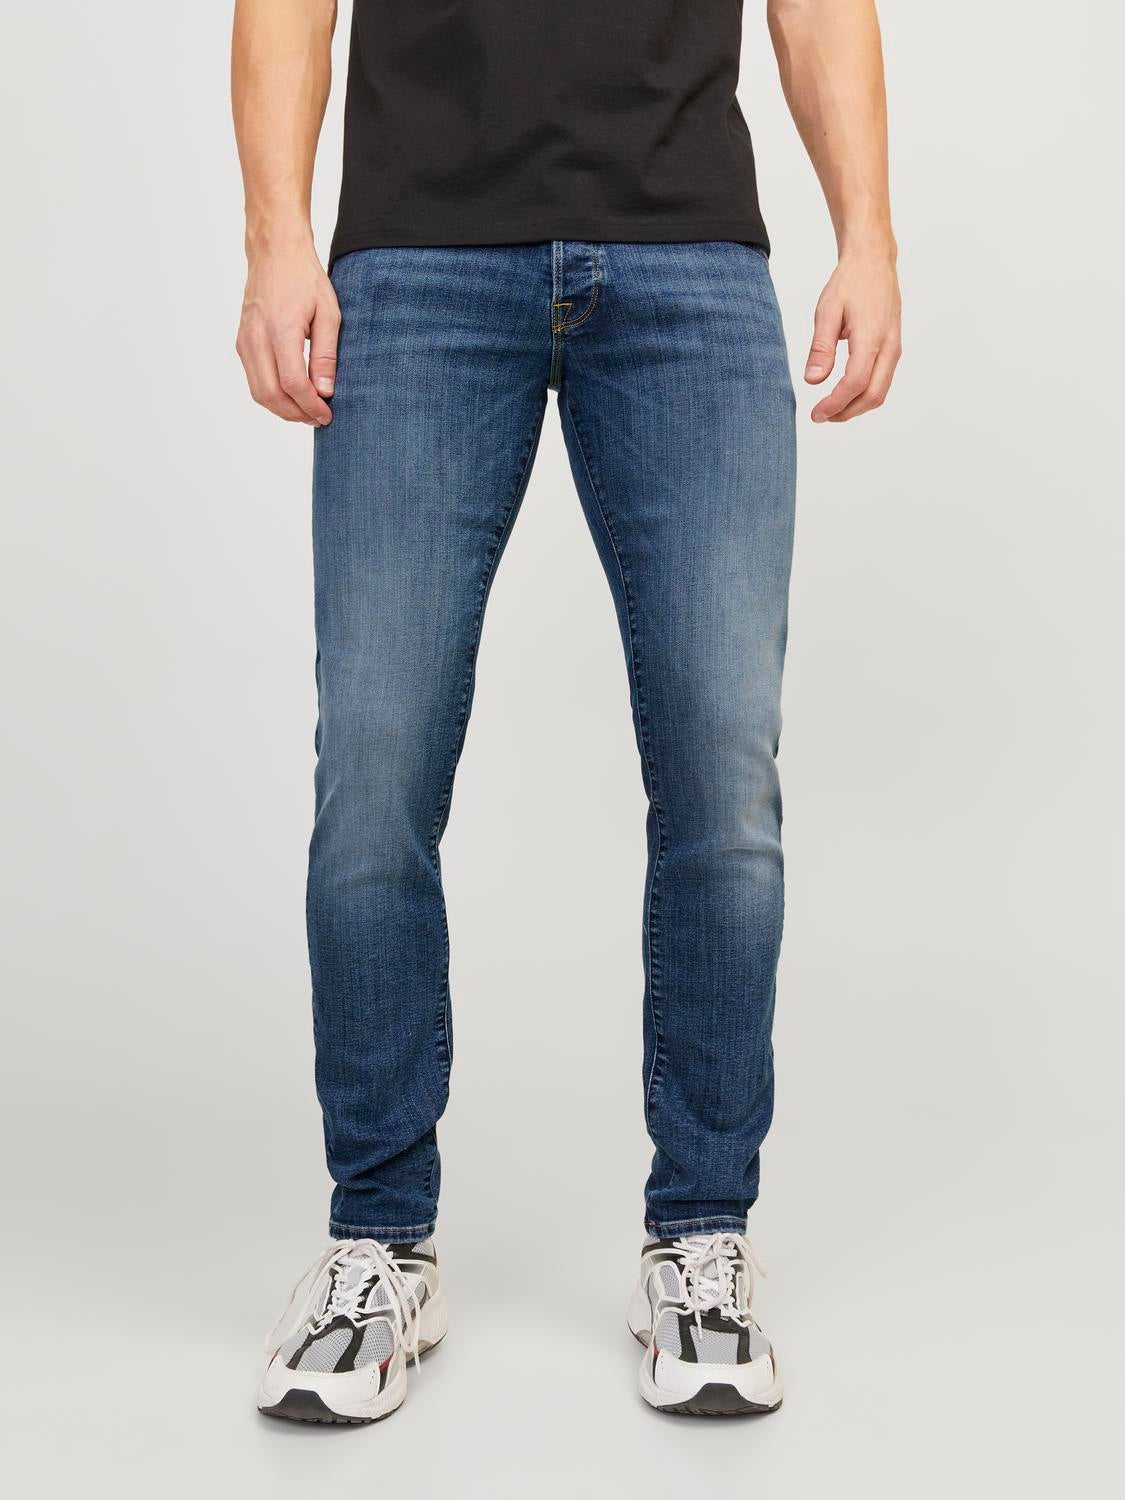 Jack & Jones Intelligence chris loose fit jeans in light stone blue wash  with rips | ASOS